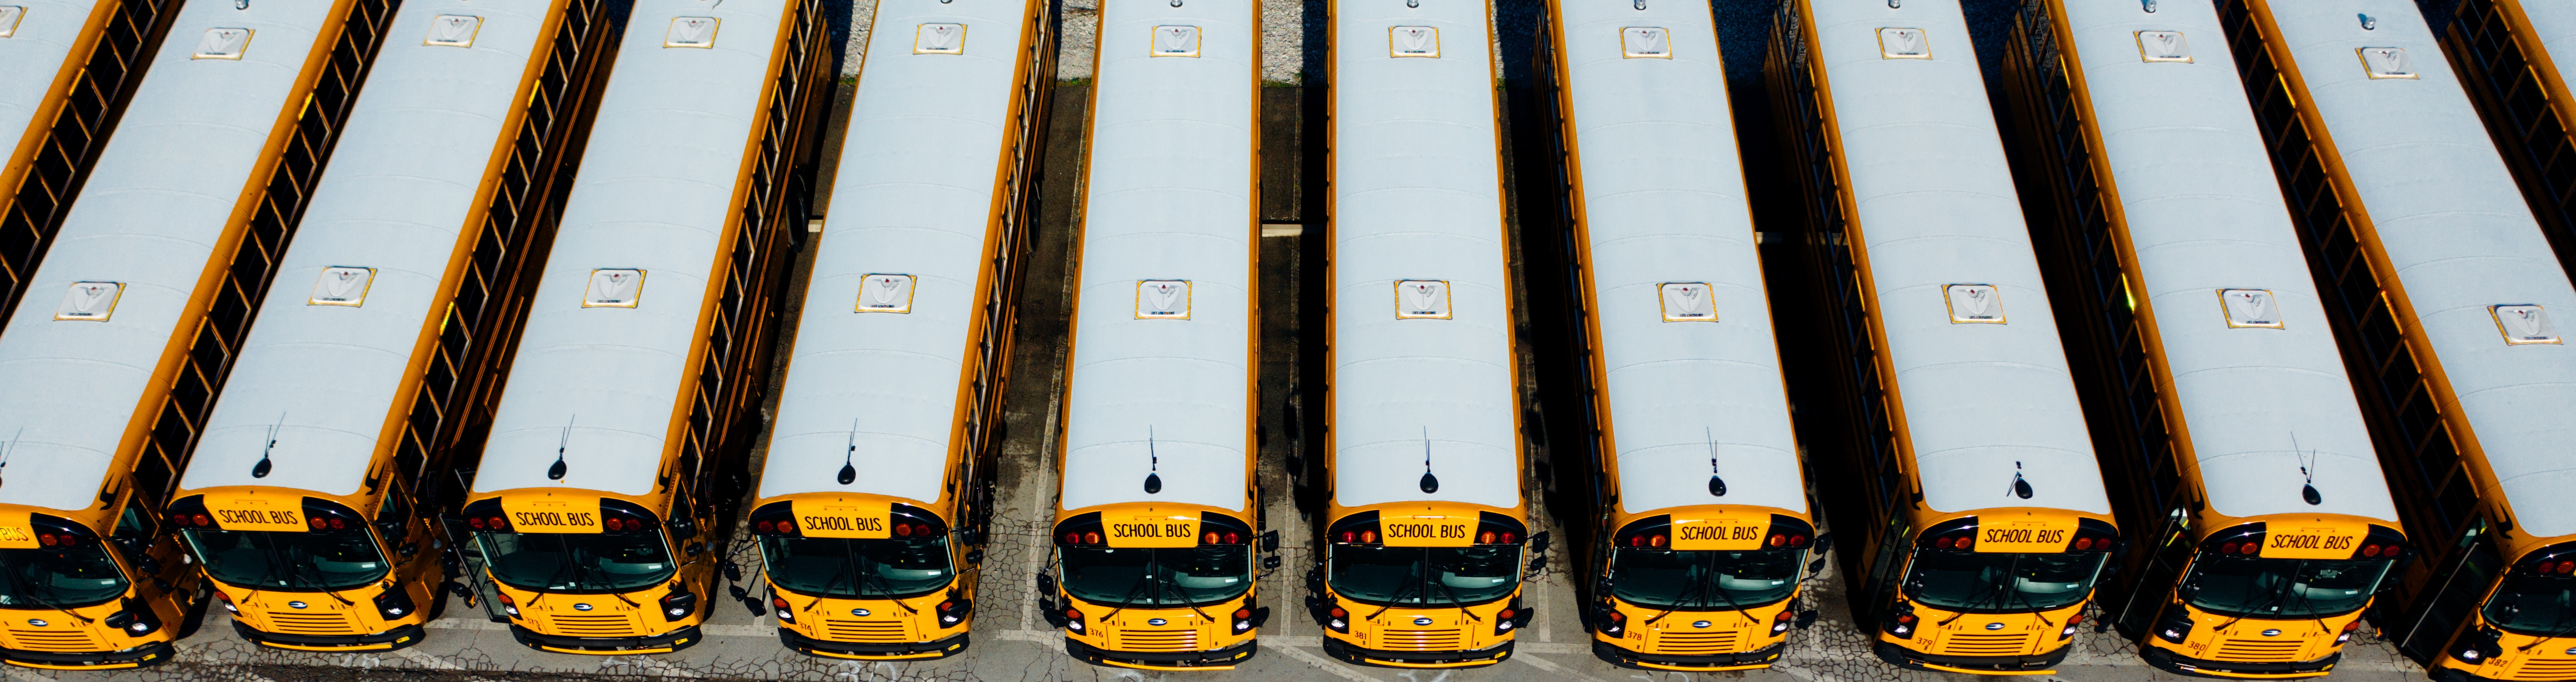 School buses parked